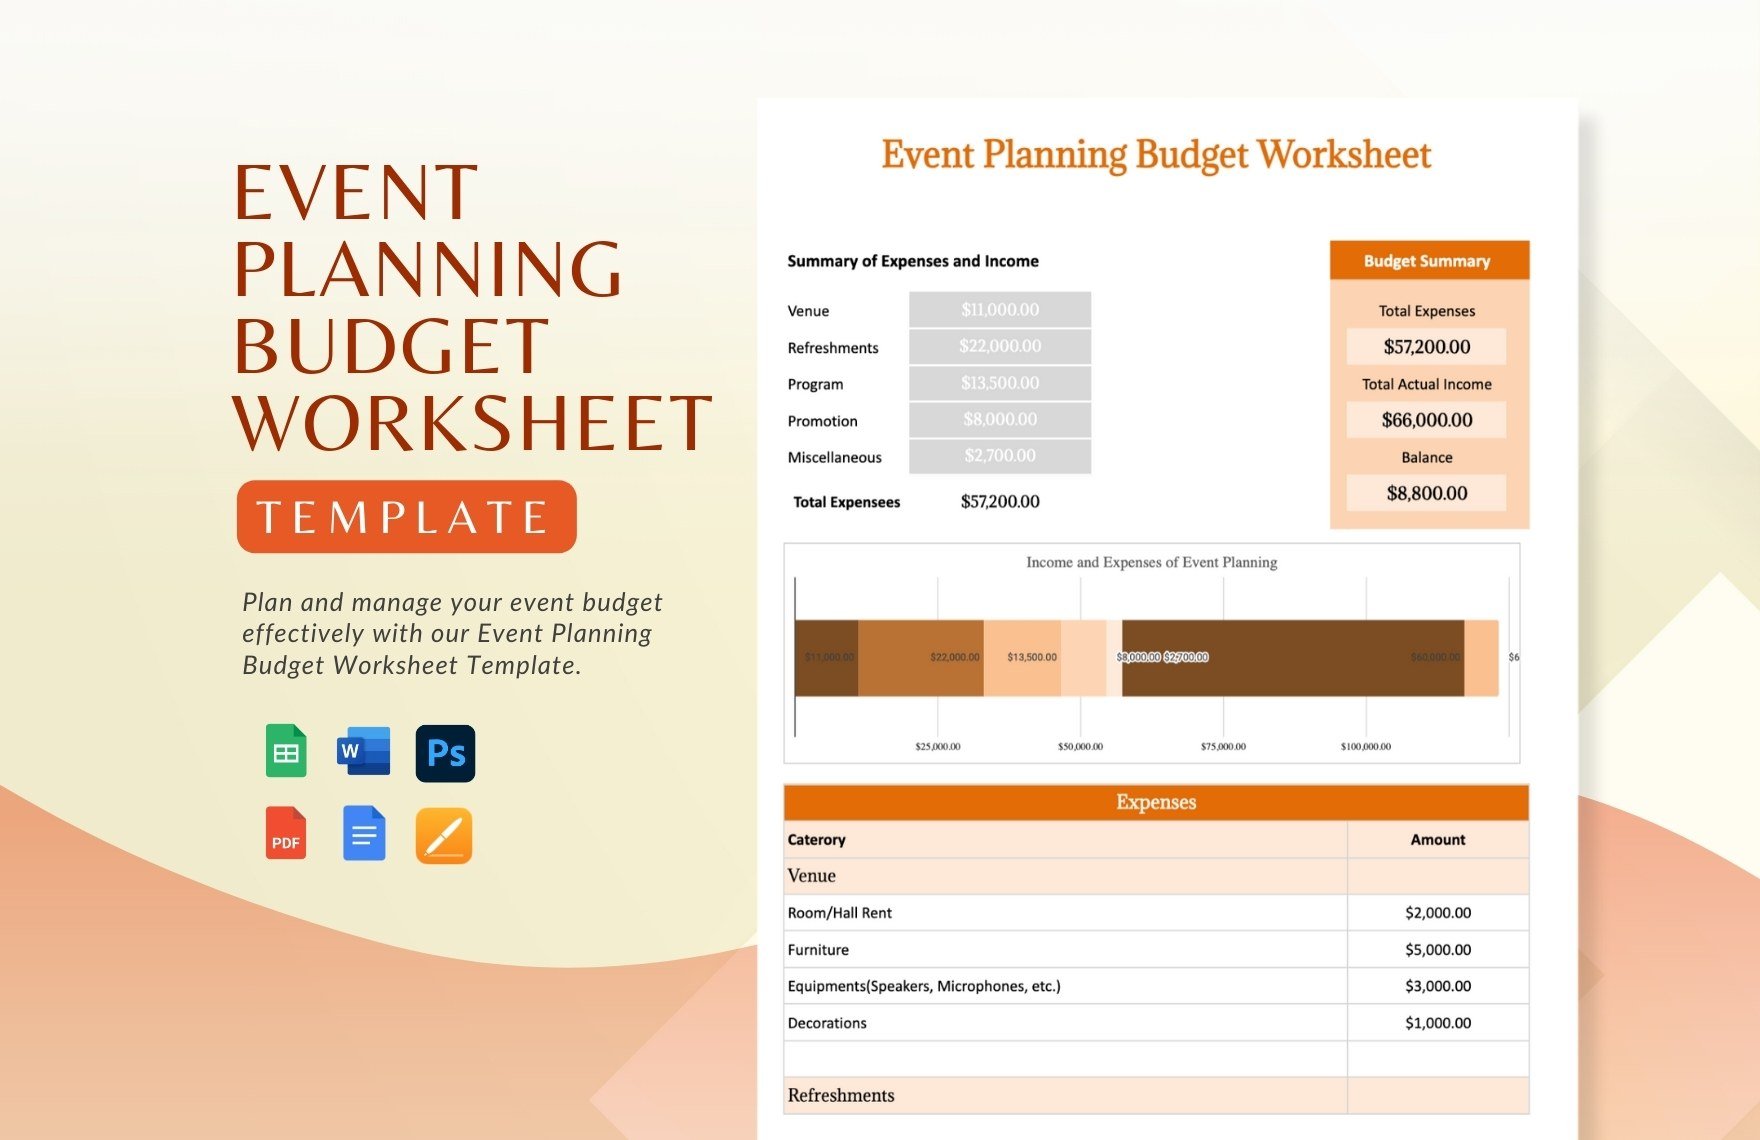 Event Planning Budget Worksheet Template in Word, Google Docs, PDF, Google Sheets, PSD, Apple Pages